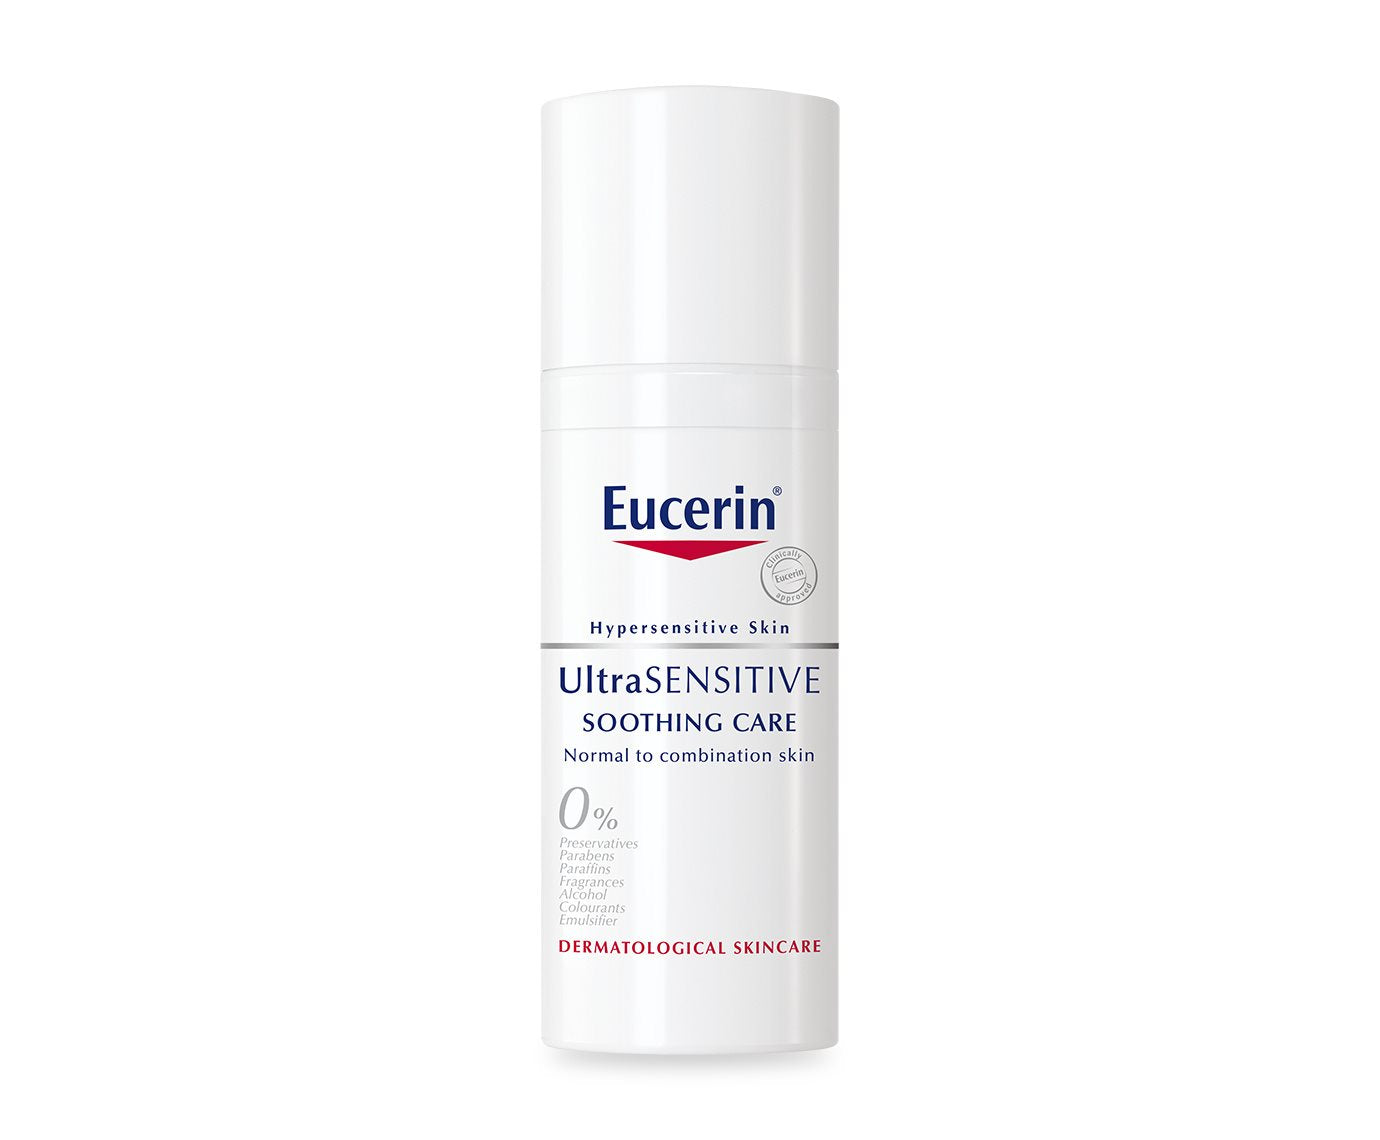 Eucerin UltraSensitive Soothing Care Dry Skin 50ml 舒安特效修護霜 (乾性肌膚)